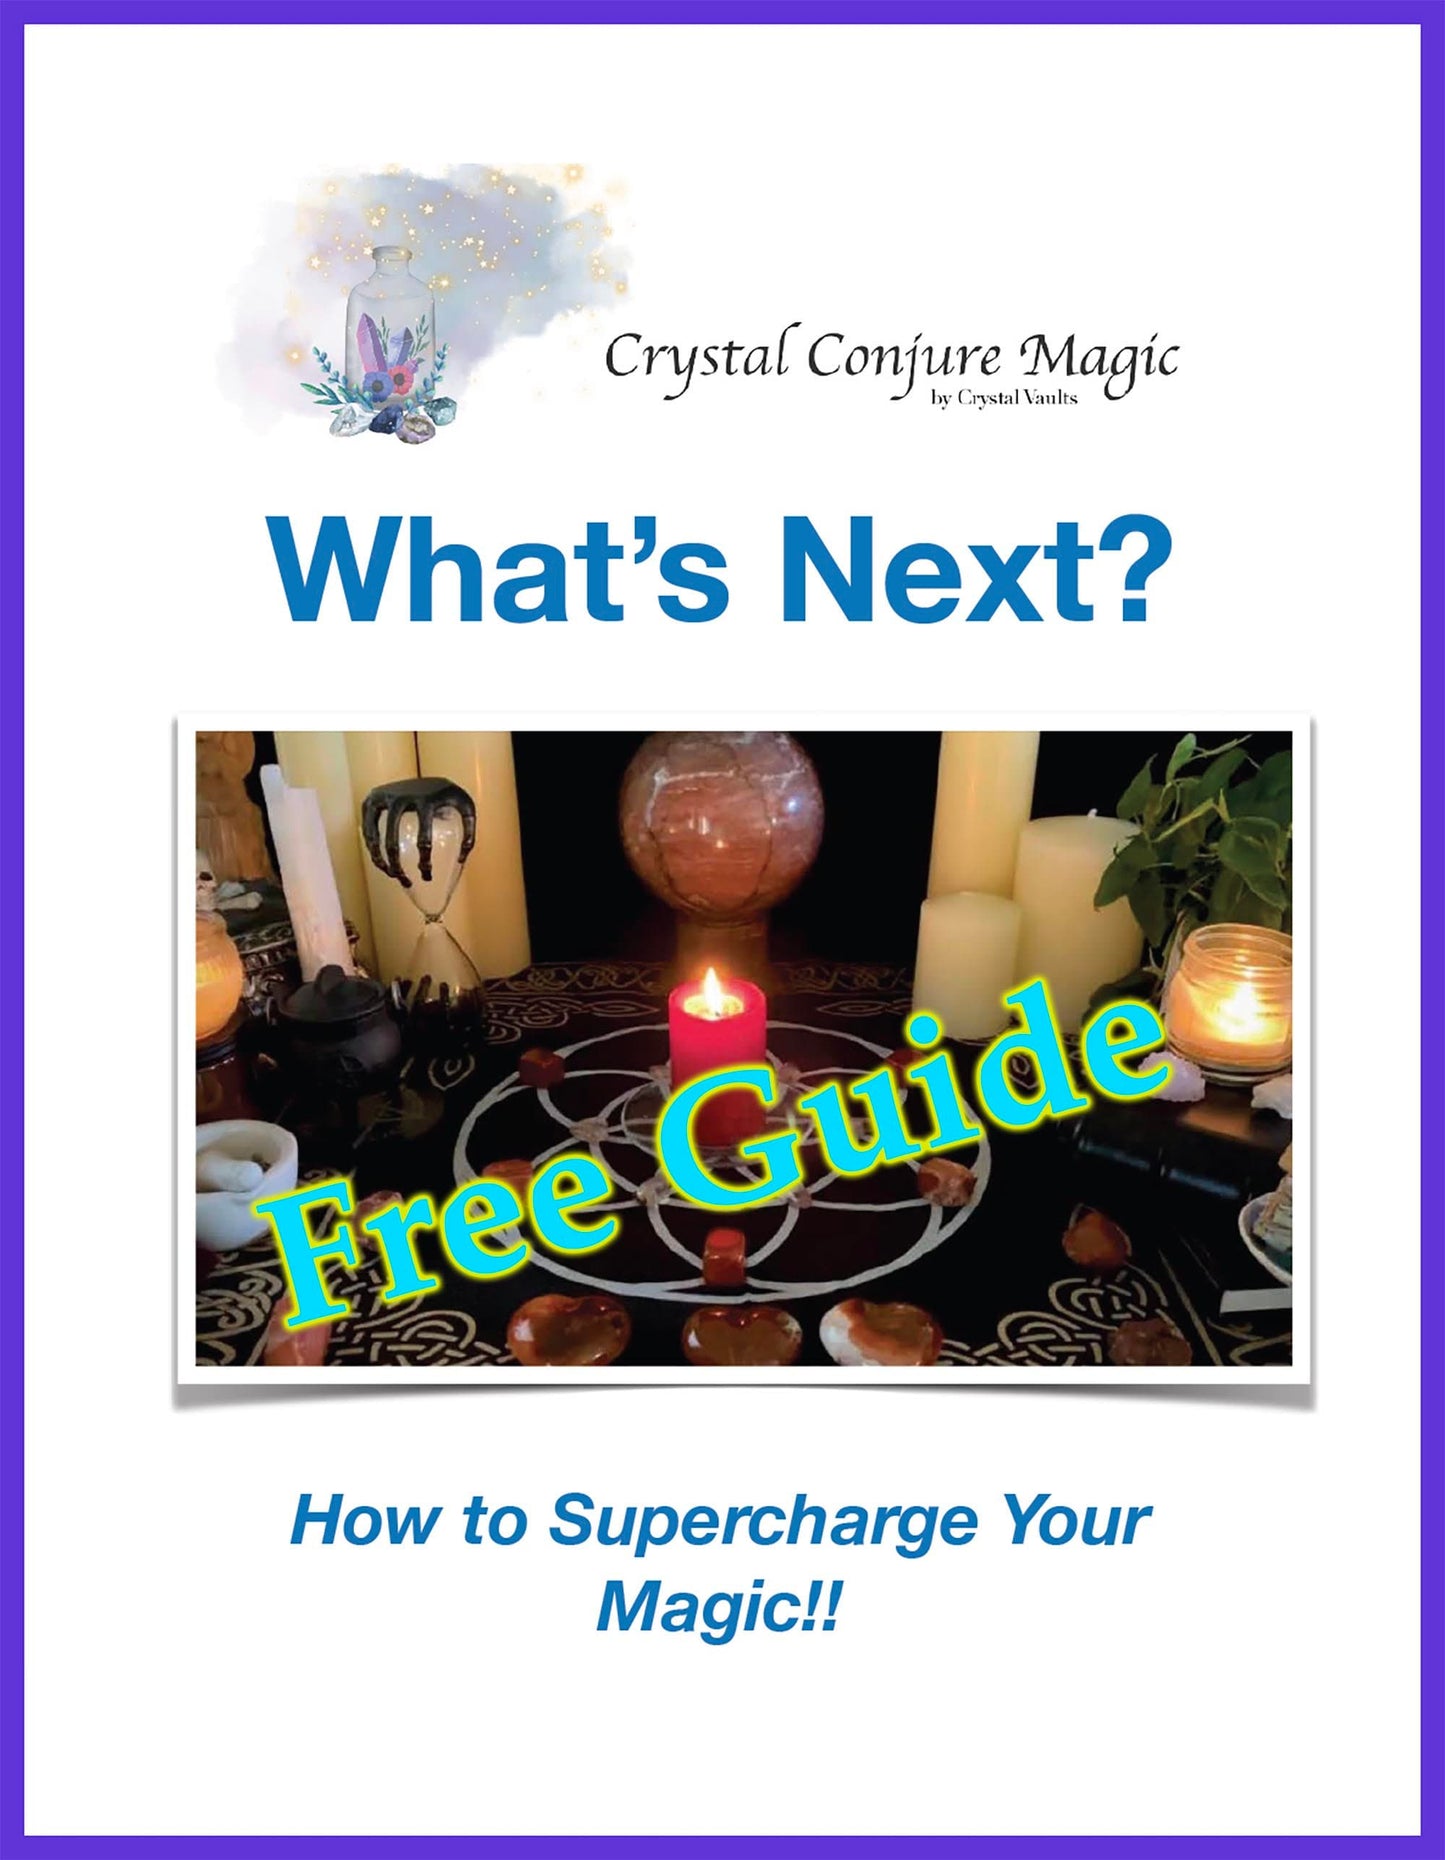 Responsibility Spell - be empowered to meet your responsibilities with a calm, centered approach